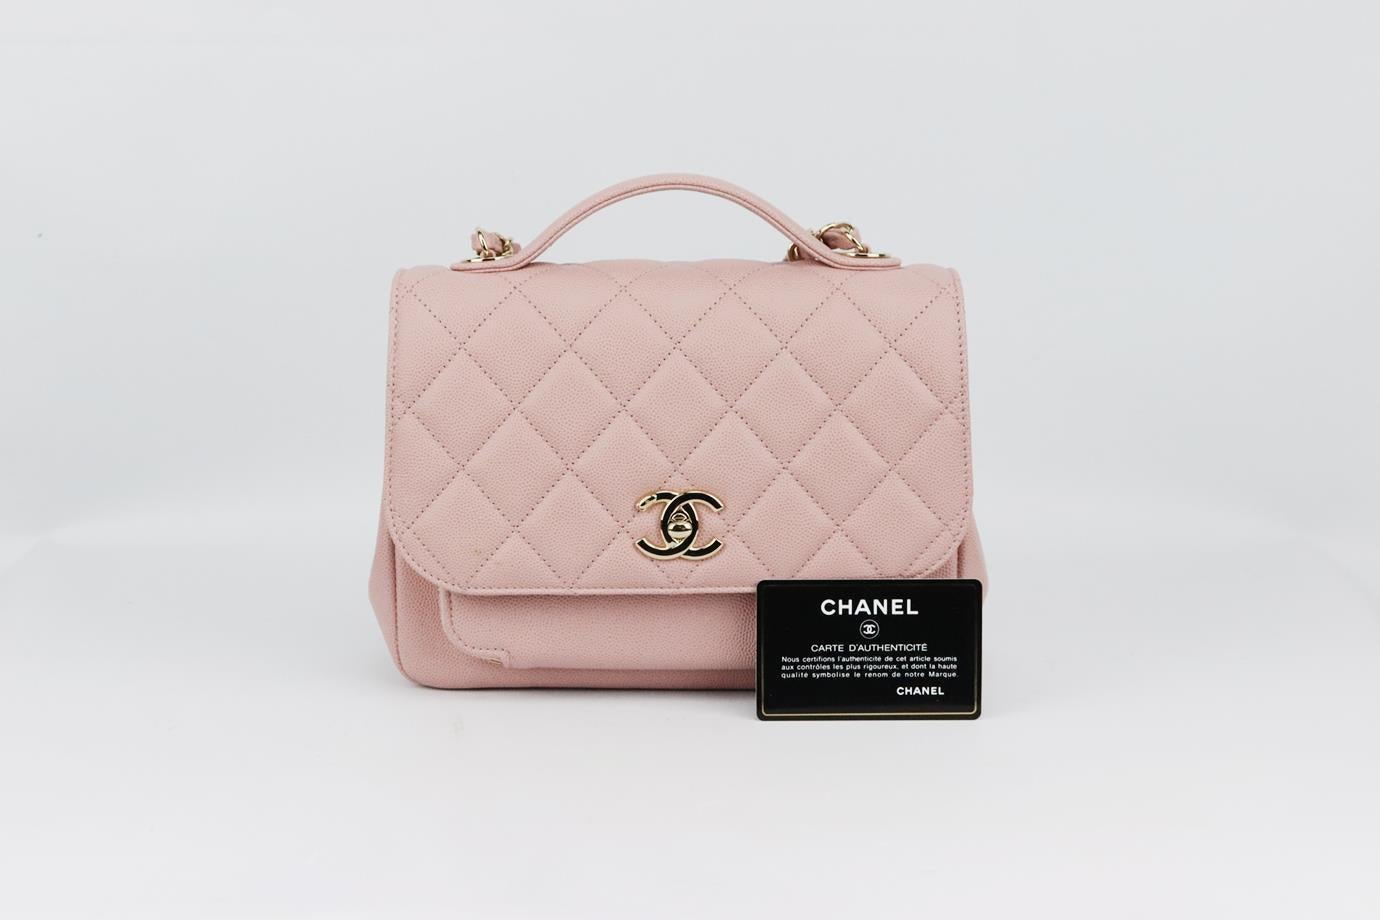 Made in Italy, this beautiful 2019 Chanel 'Business Affinity' shoulder bag has been made from light-pink Caviar leather exterior, this piece is decorated with Chanel's gold-tone twist-lock CC logo on the front and finished with a silver chunky chain